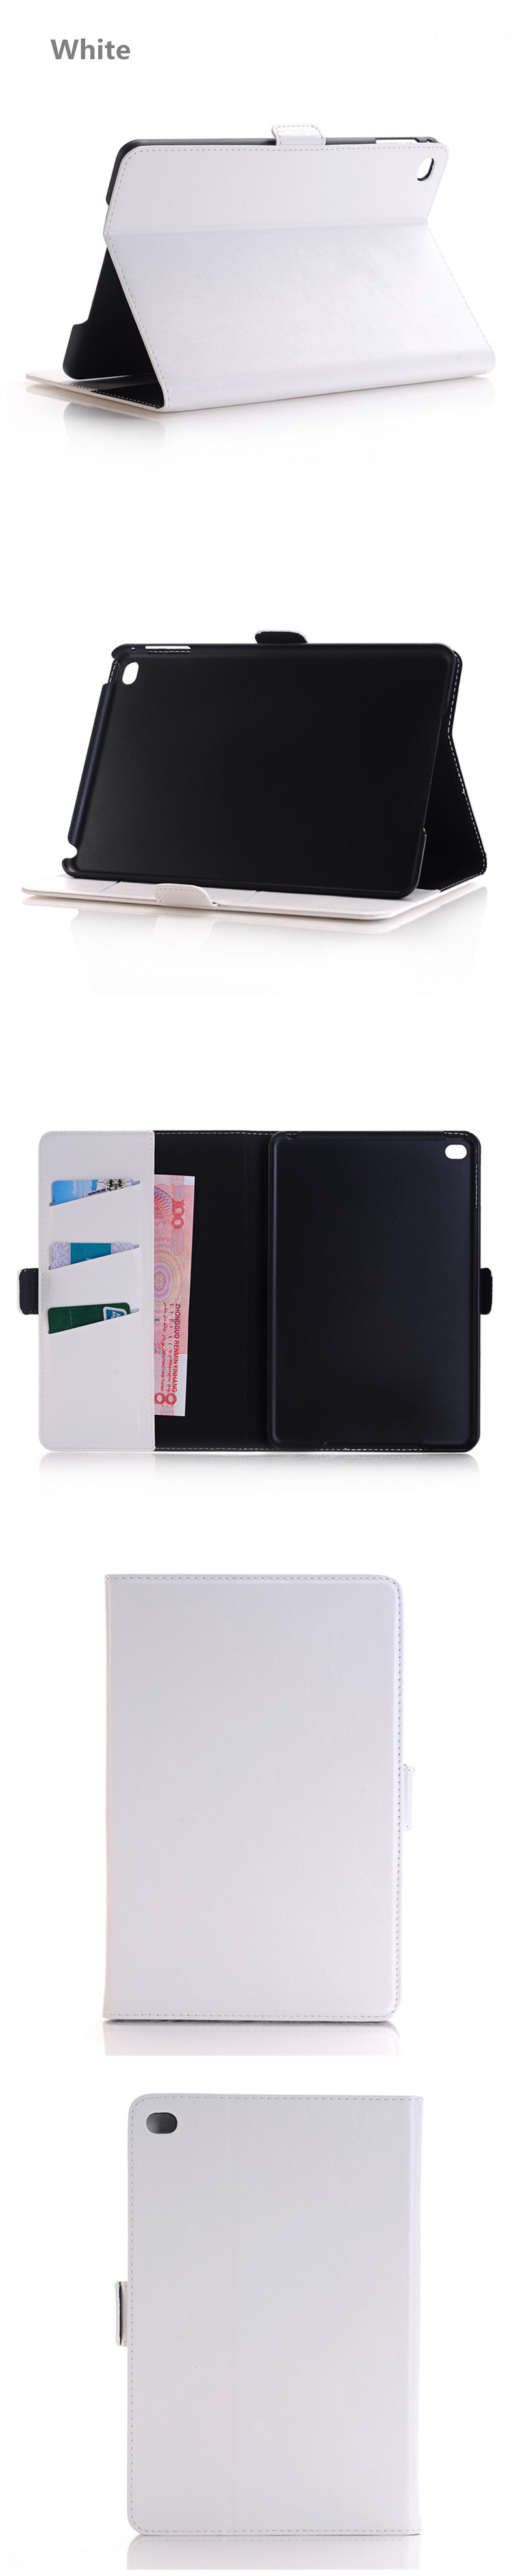 WLD-A005-Belt-Buckle-Shell-Flip-PU-Leather--Protective-Cases-For-iPad-Mini-4-1013508-2